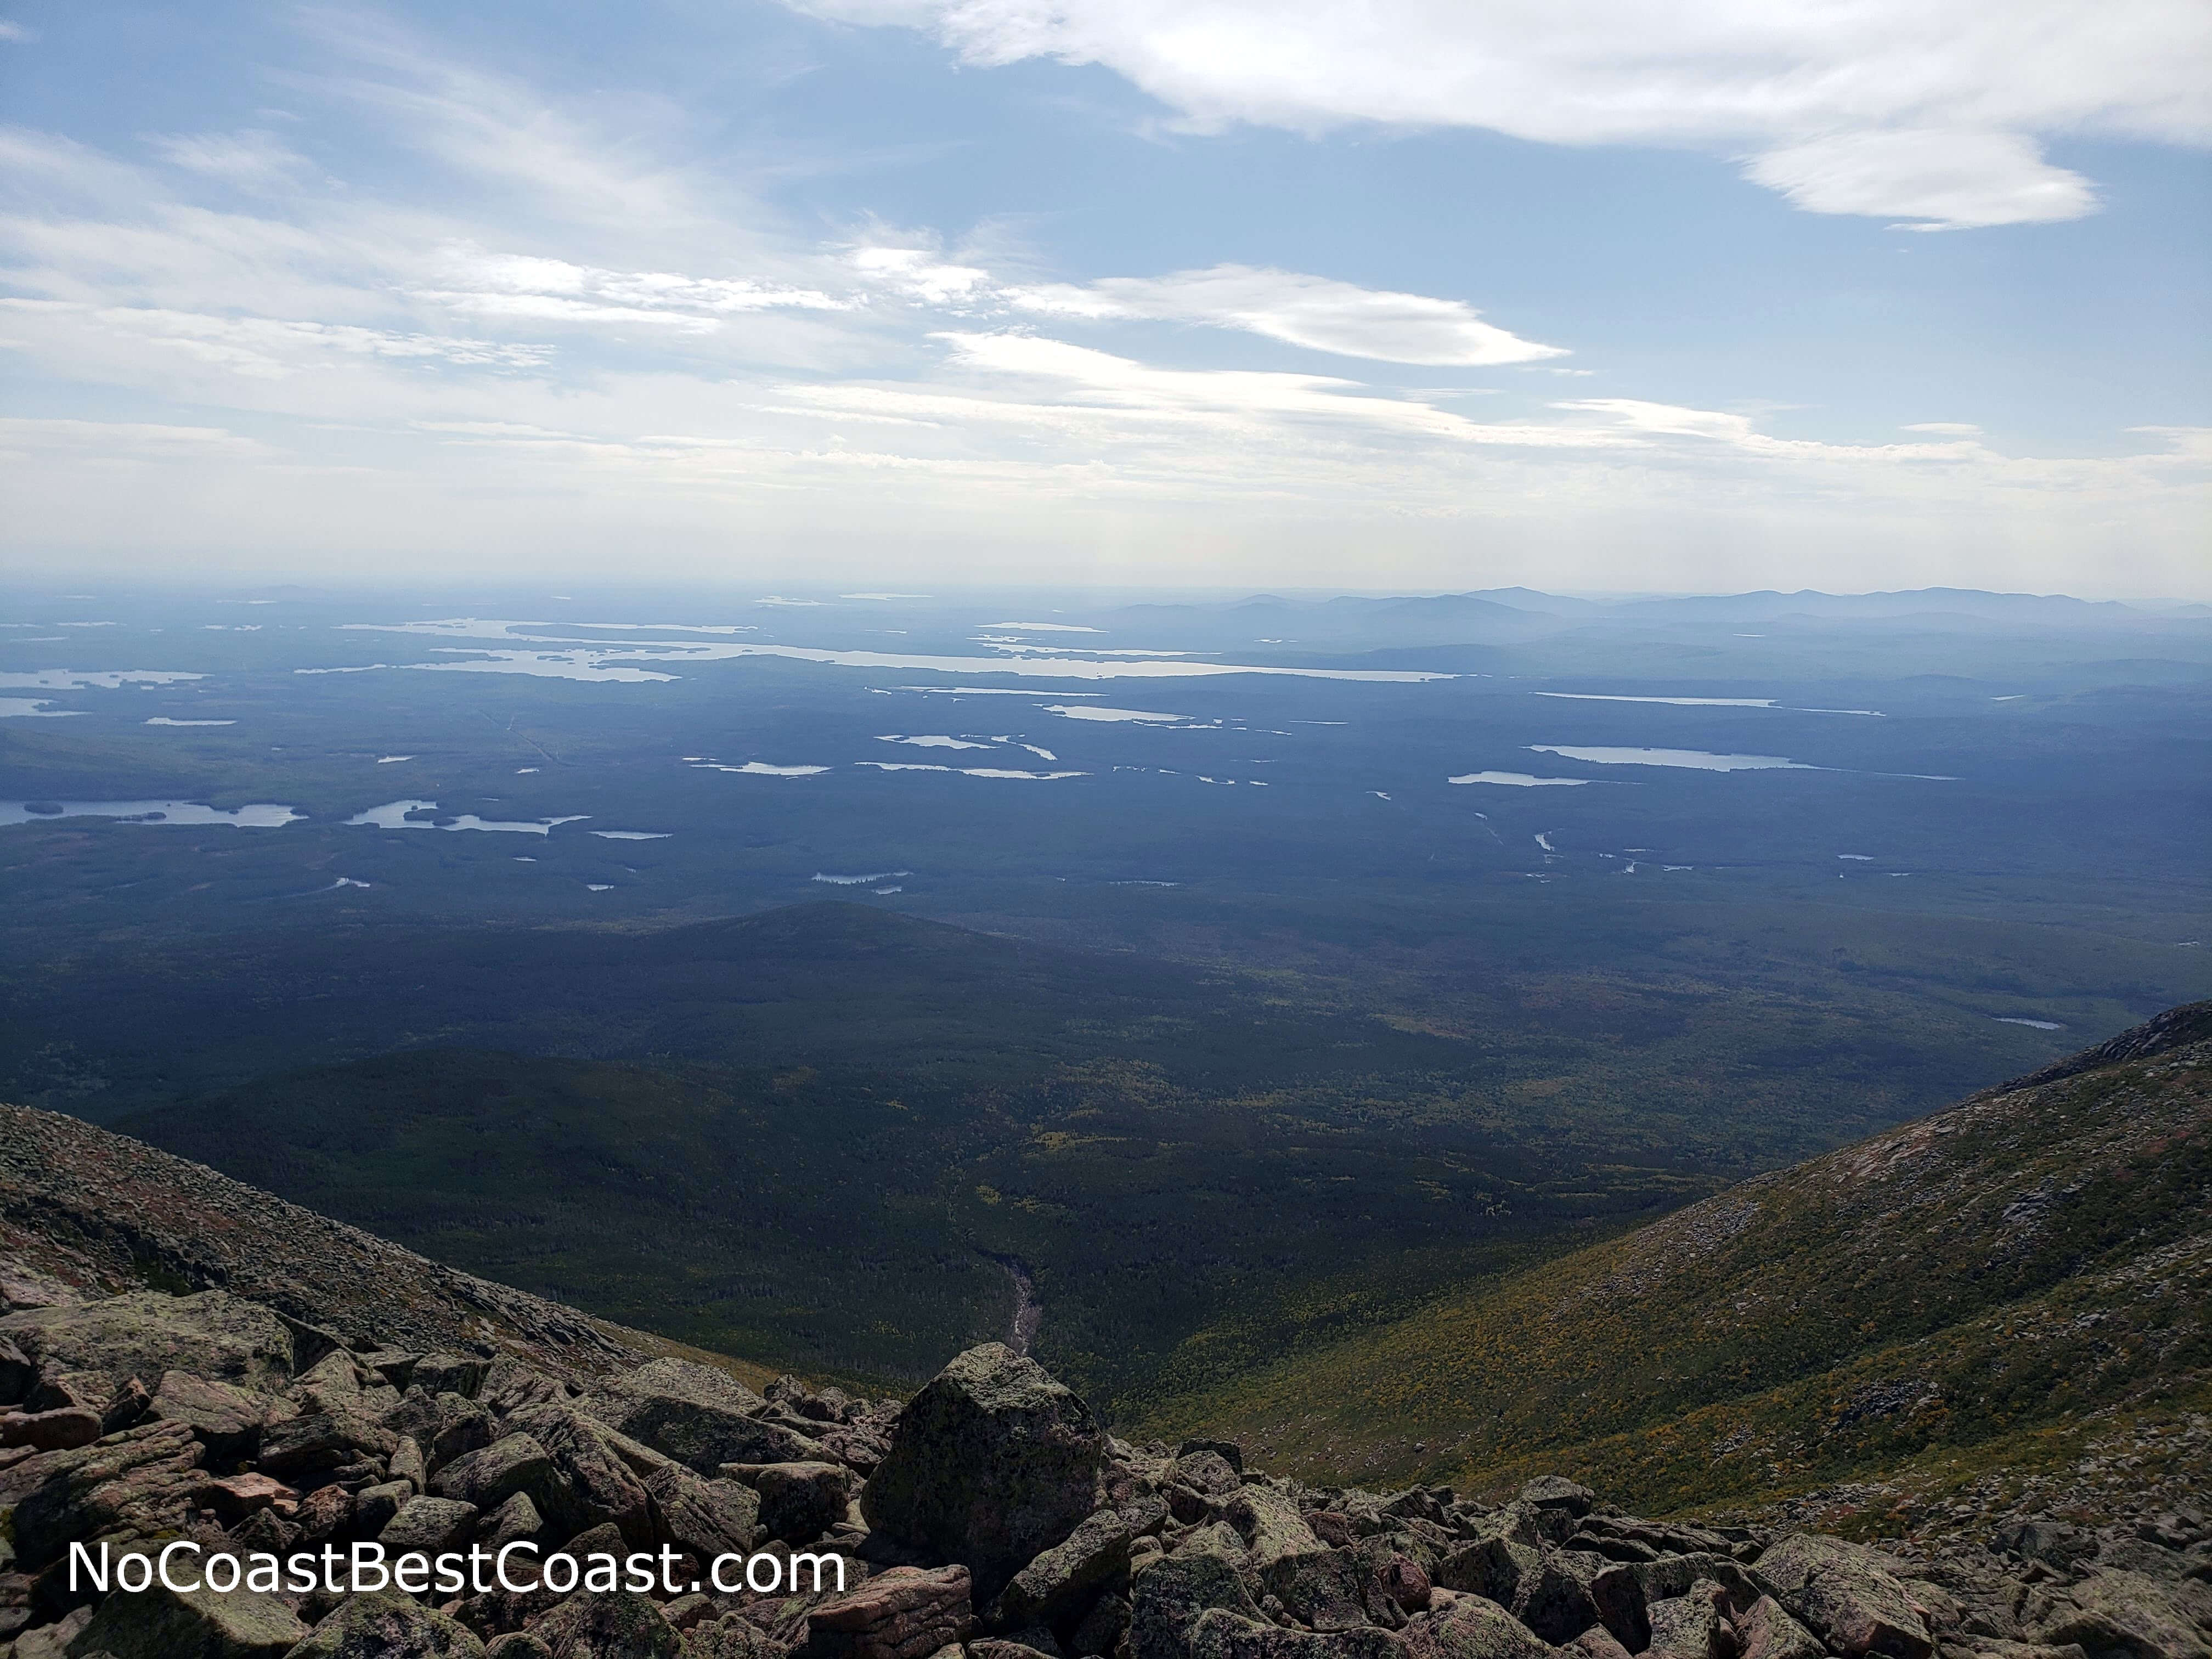 Looking south from the summit at the many lakes and distant mountains of Maine